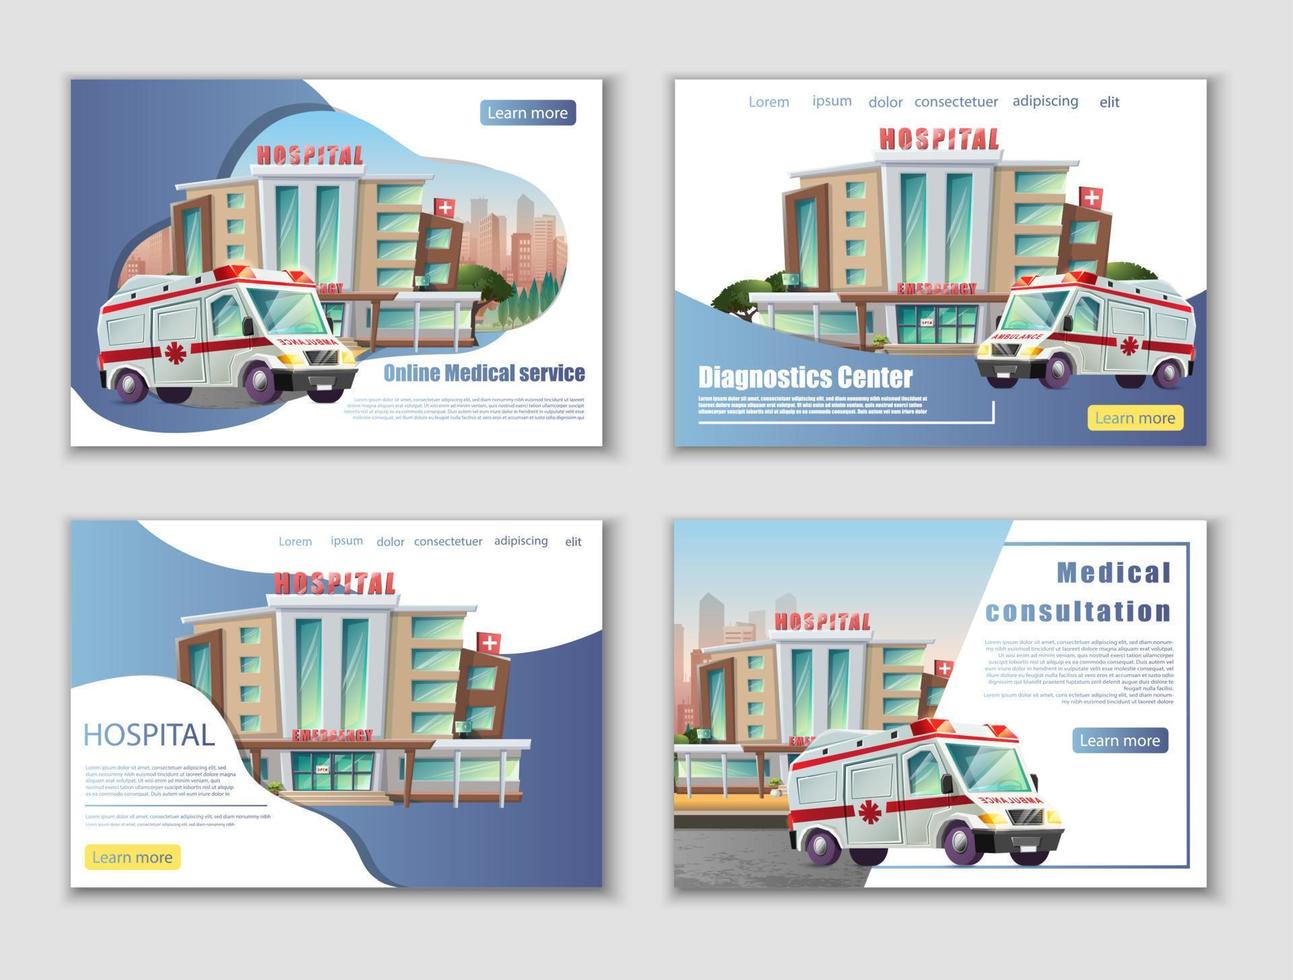 banners banner set in cartoon style with hospital building and ambulances. Medical consultation, diagnostic center banners vector